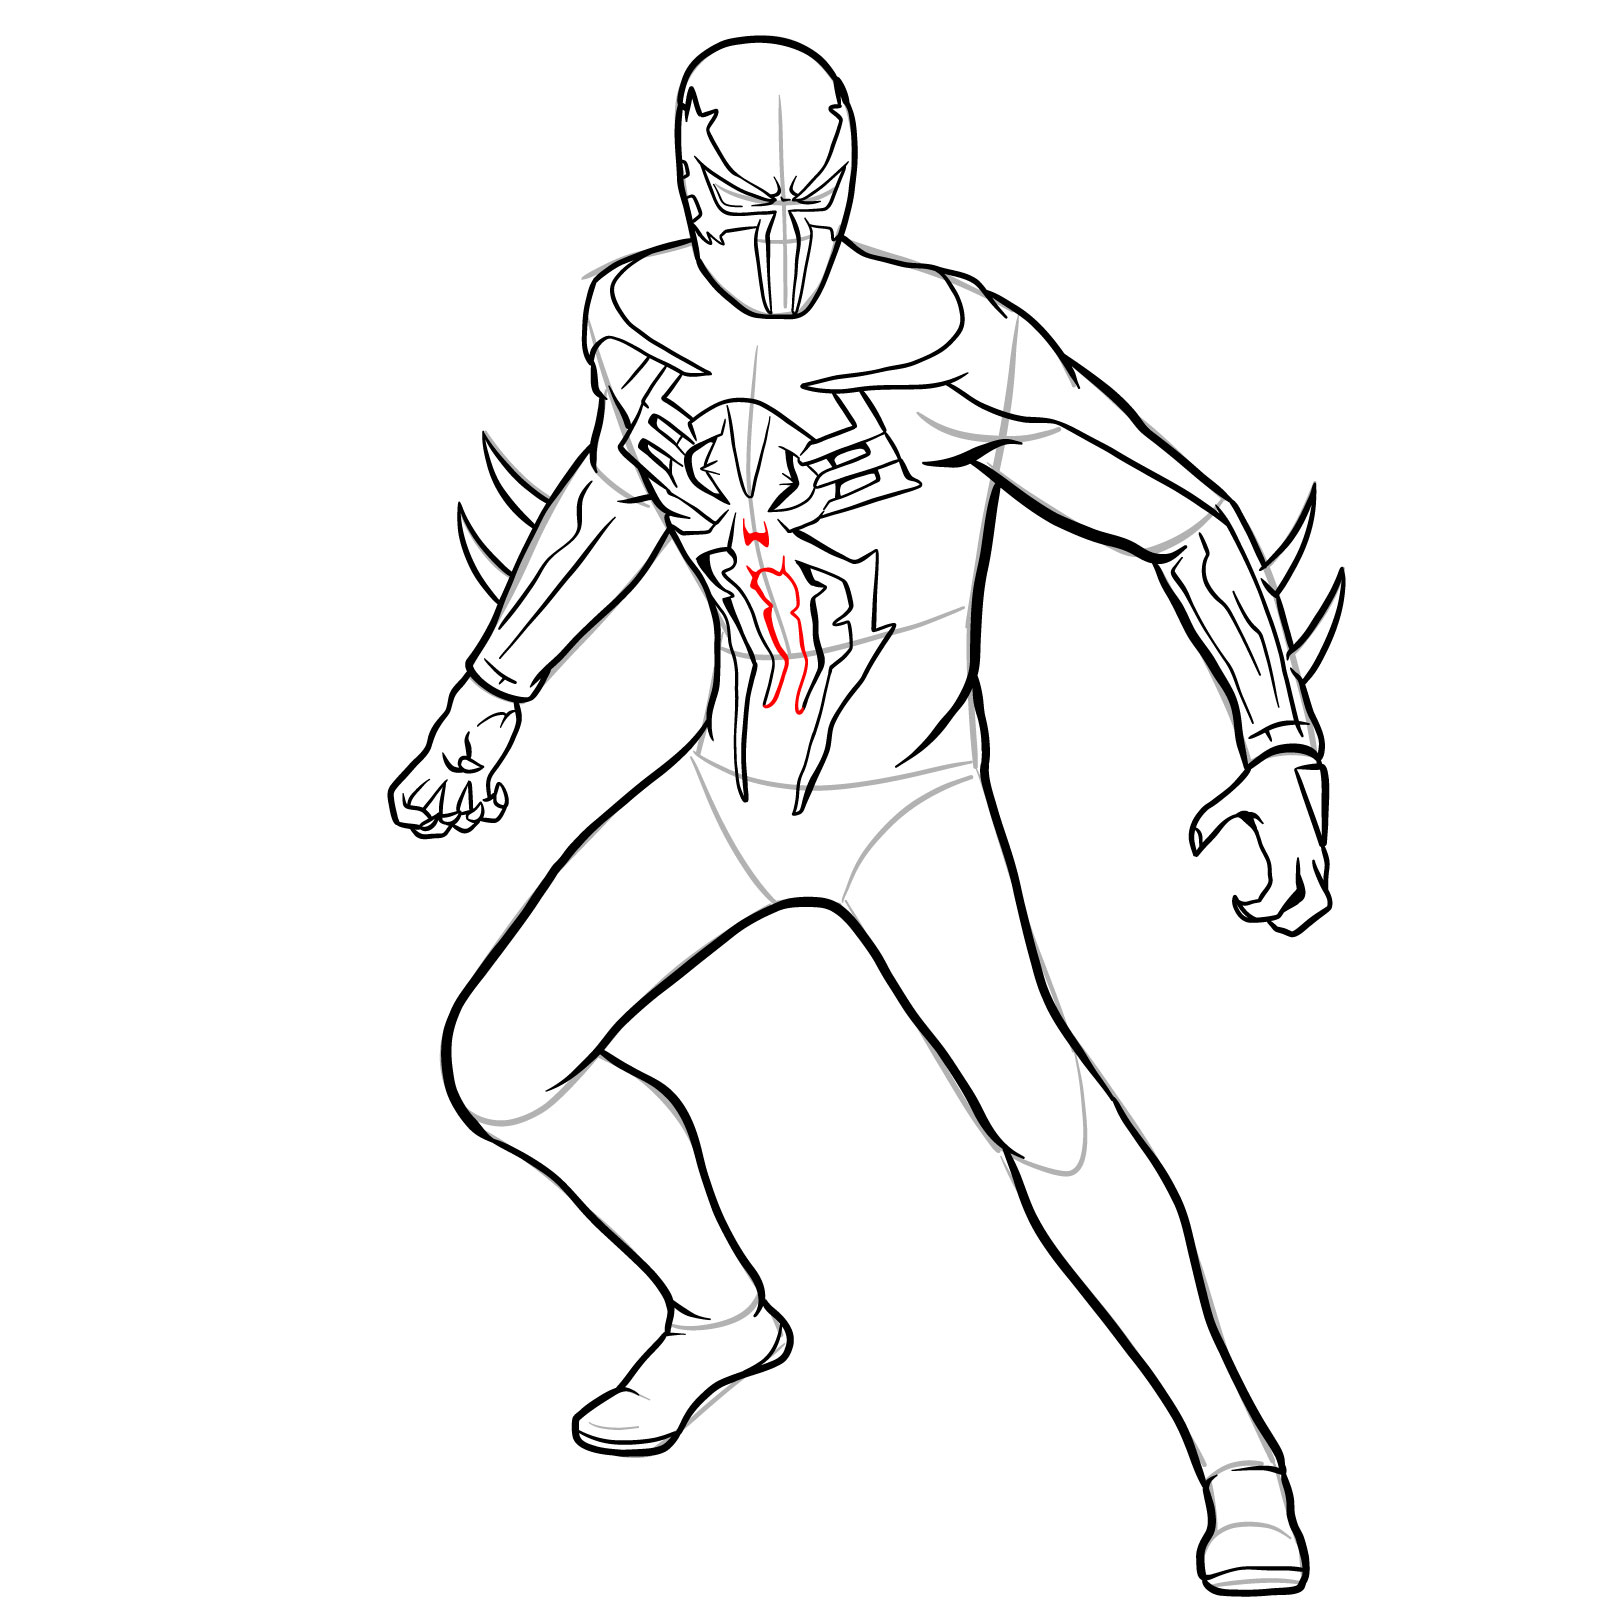 Drew a simple sketch of my favourite design for Spider-Man! : r/Spiderman